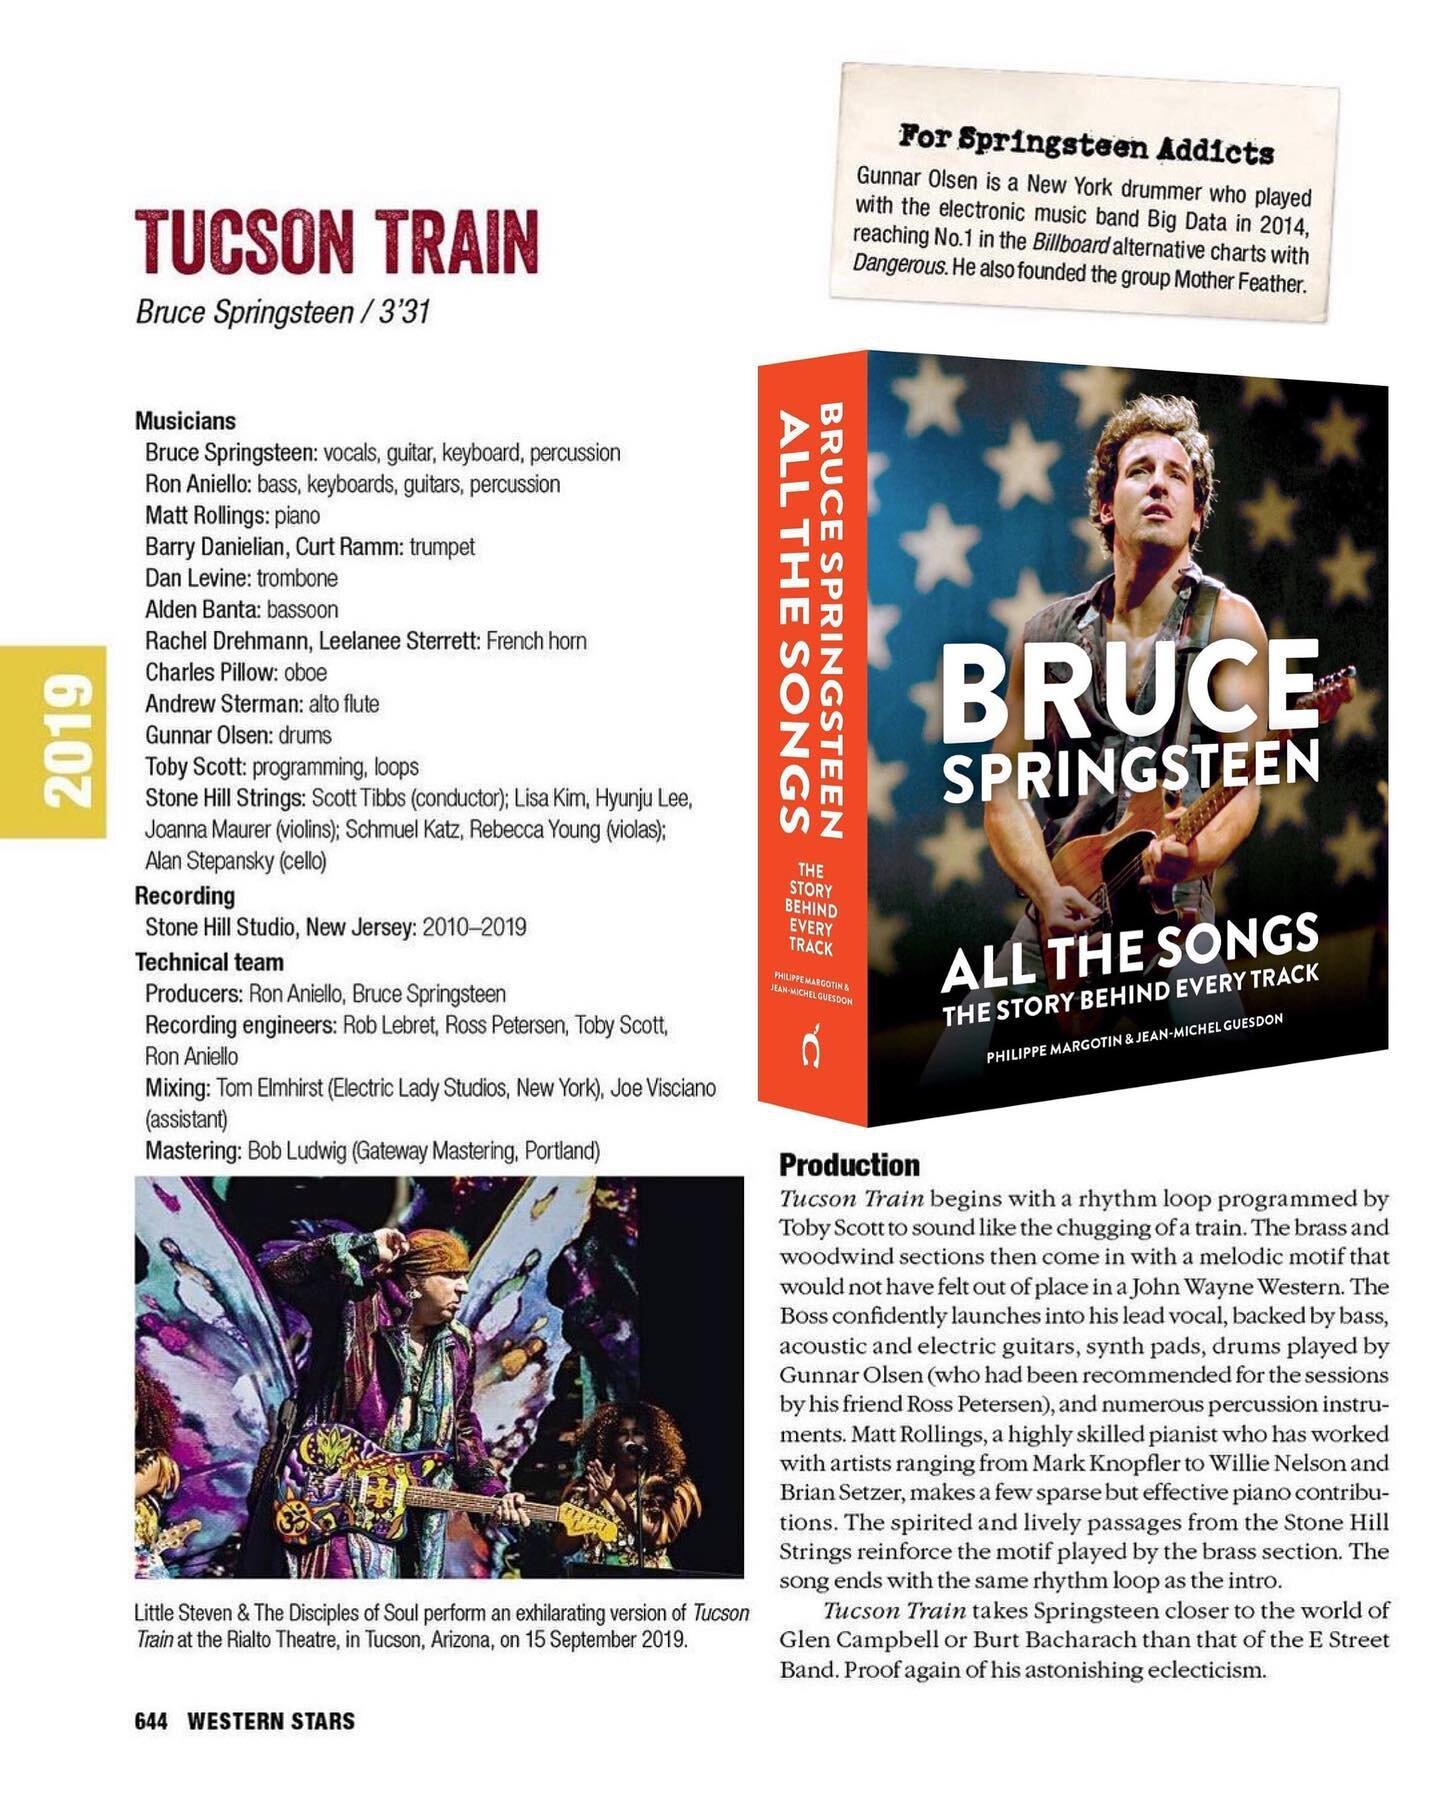 Pretty wild to see my name amongst all these other musicians and songs in the new book discussing @springsteen &ldquo;All The Songs&rdquo; #brucespringsteen #tucsontrain #westernstars